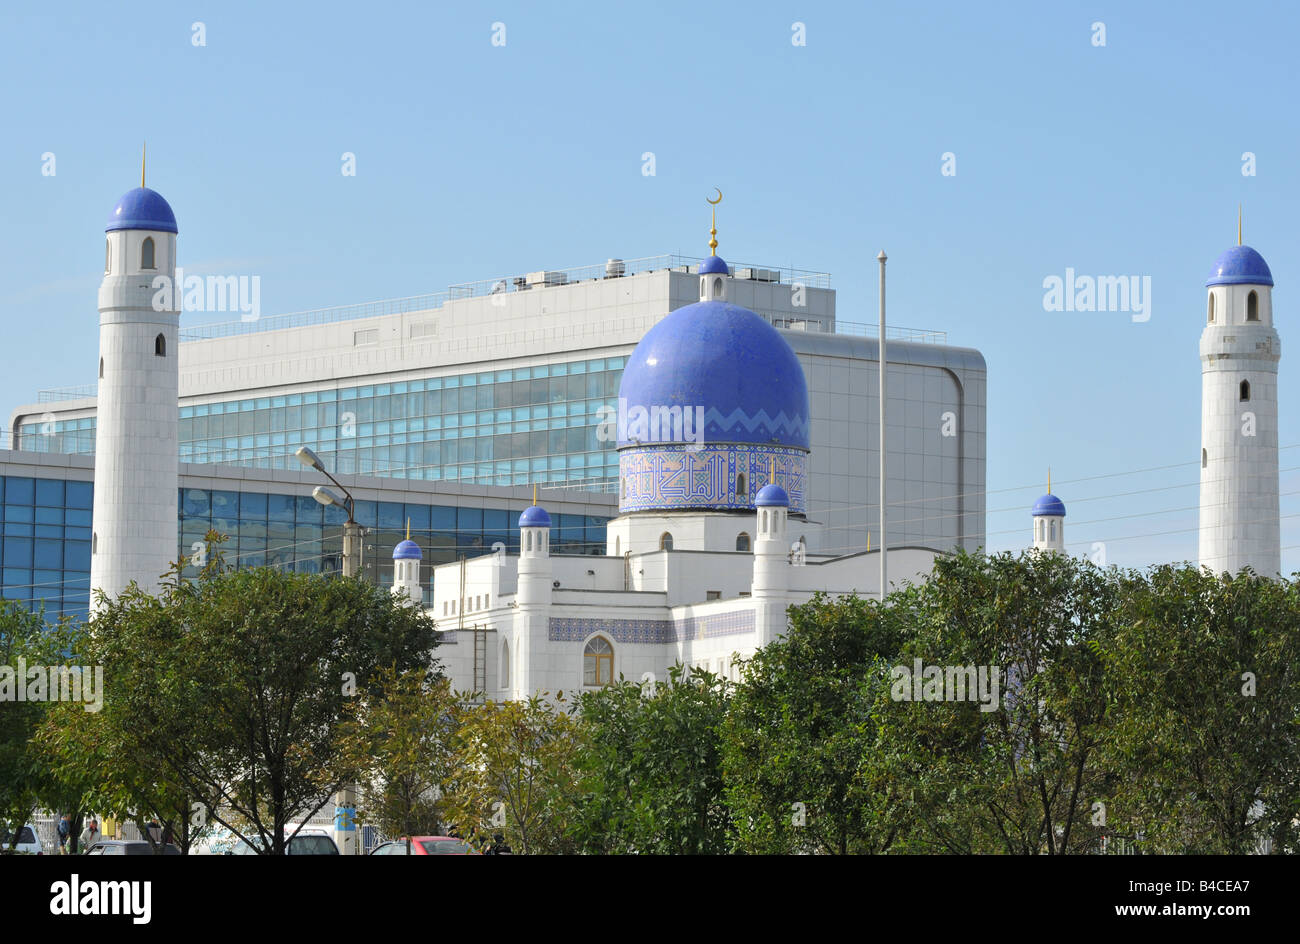 Atyrau is developing due to the vast oil and gas fields in the Caspian. The road from the airport is lined with fine buildings. Stock Photo